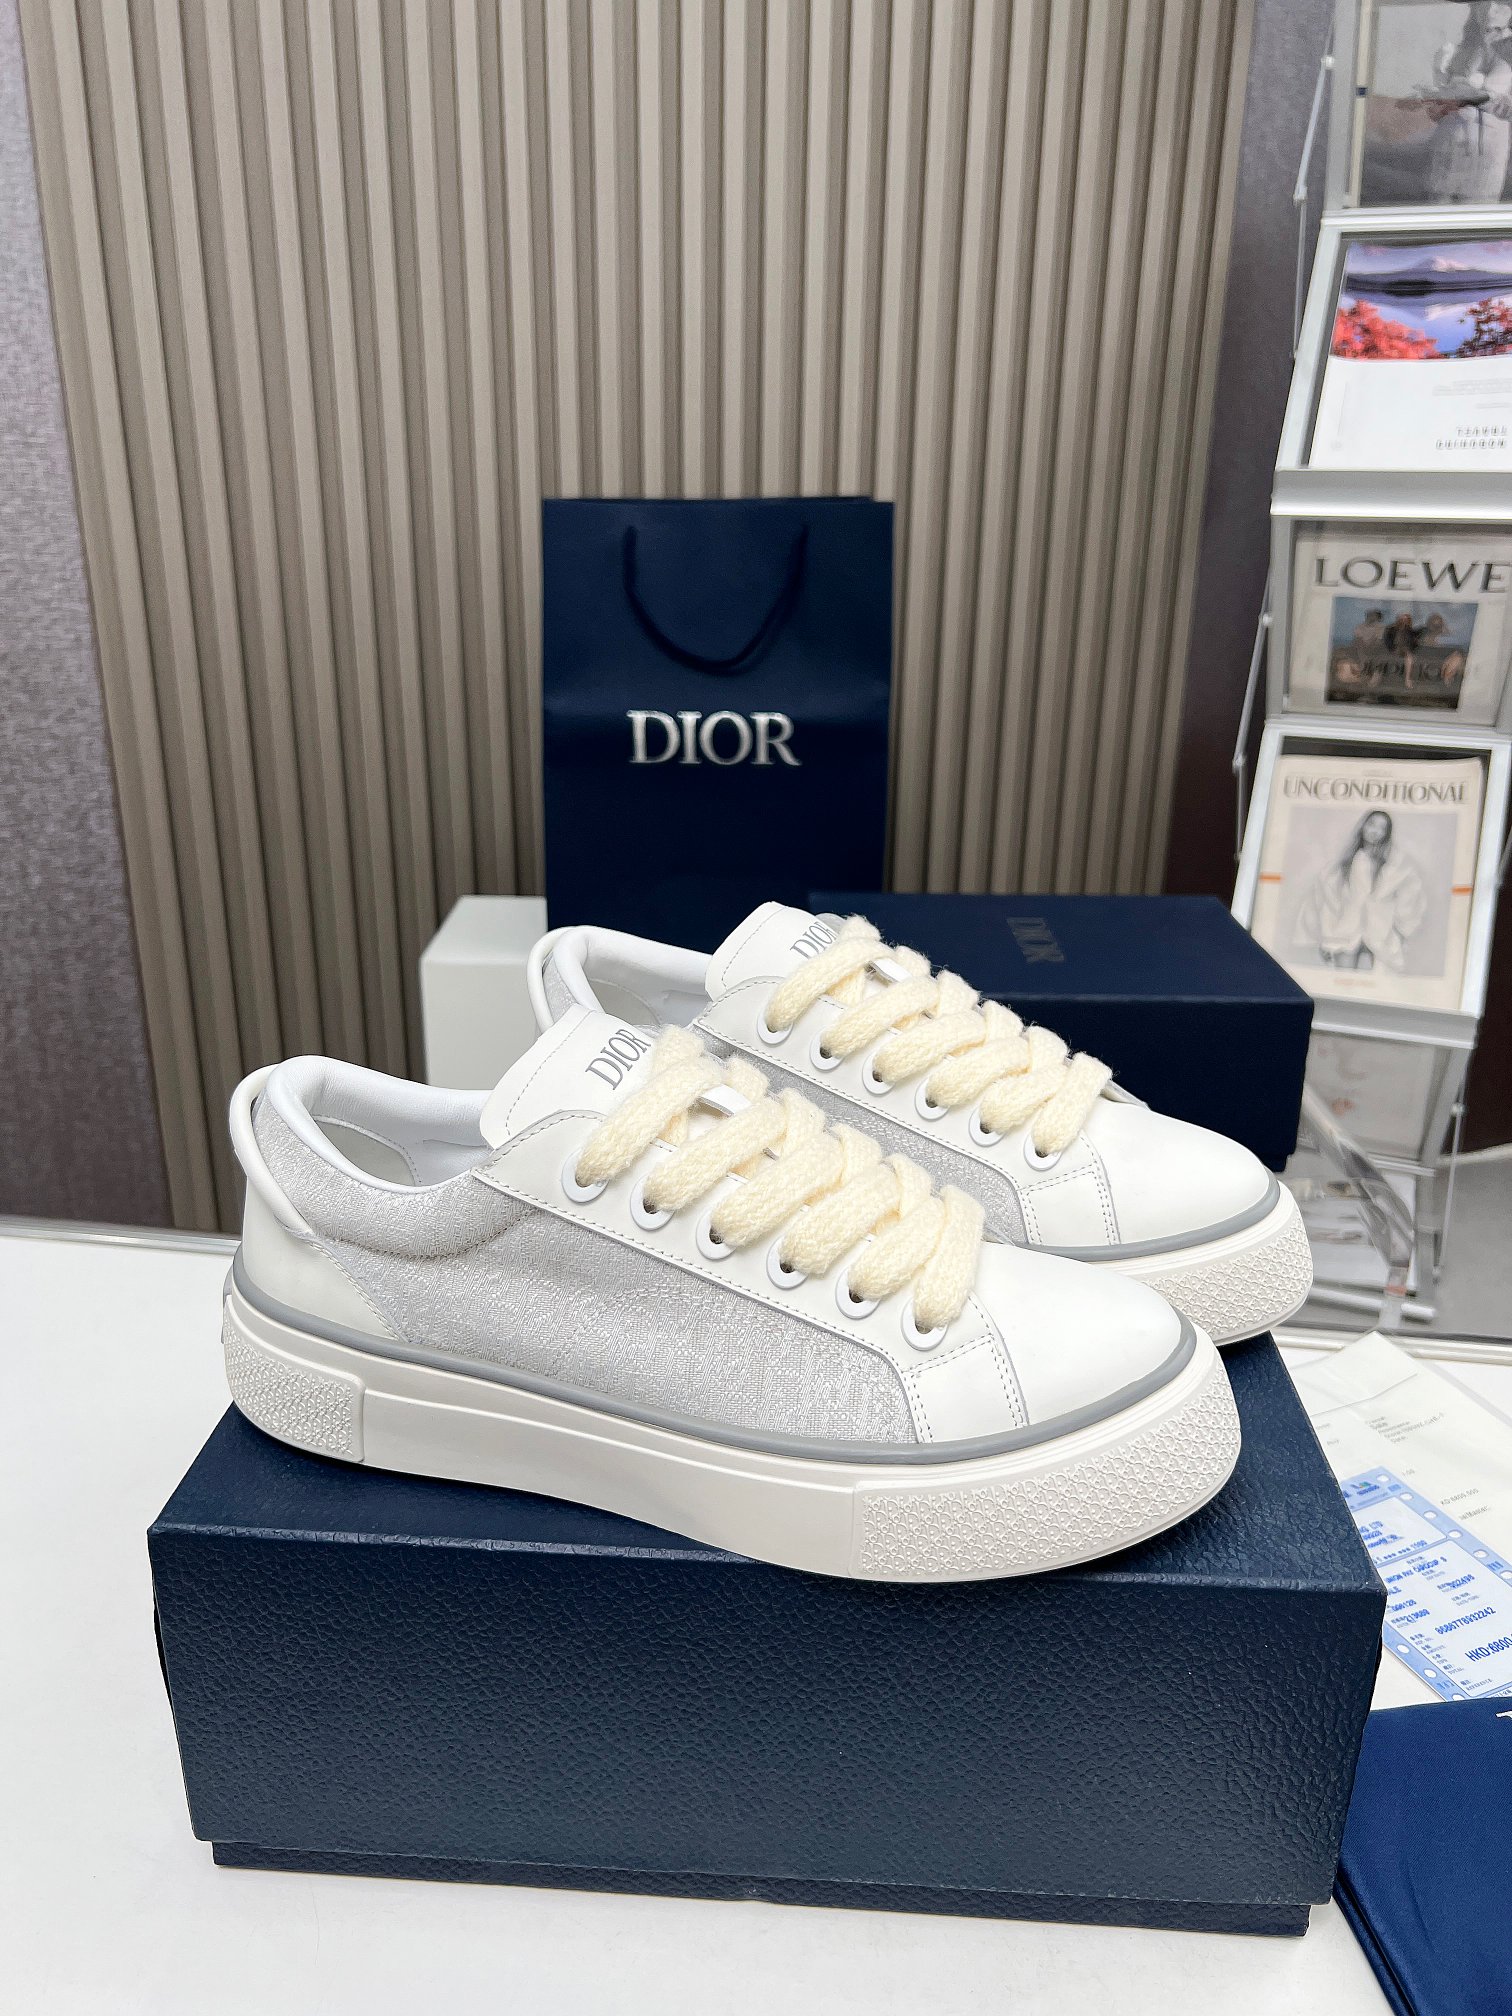 Dior Sneakers Single Layer Shoes Brown White Yellow Embroidery Unisex Women Men Cowhide Knitting Rubber Oblique Casual